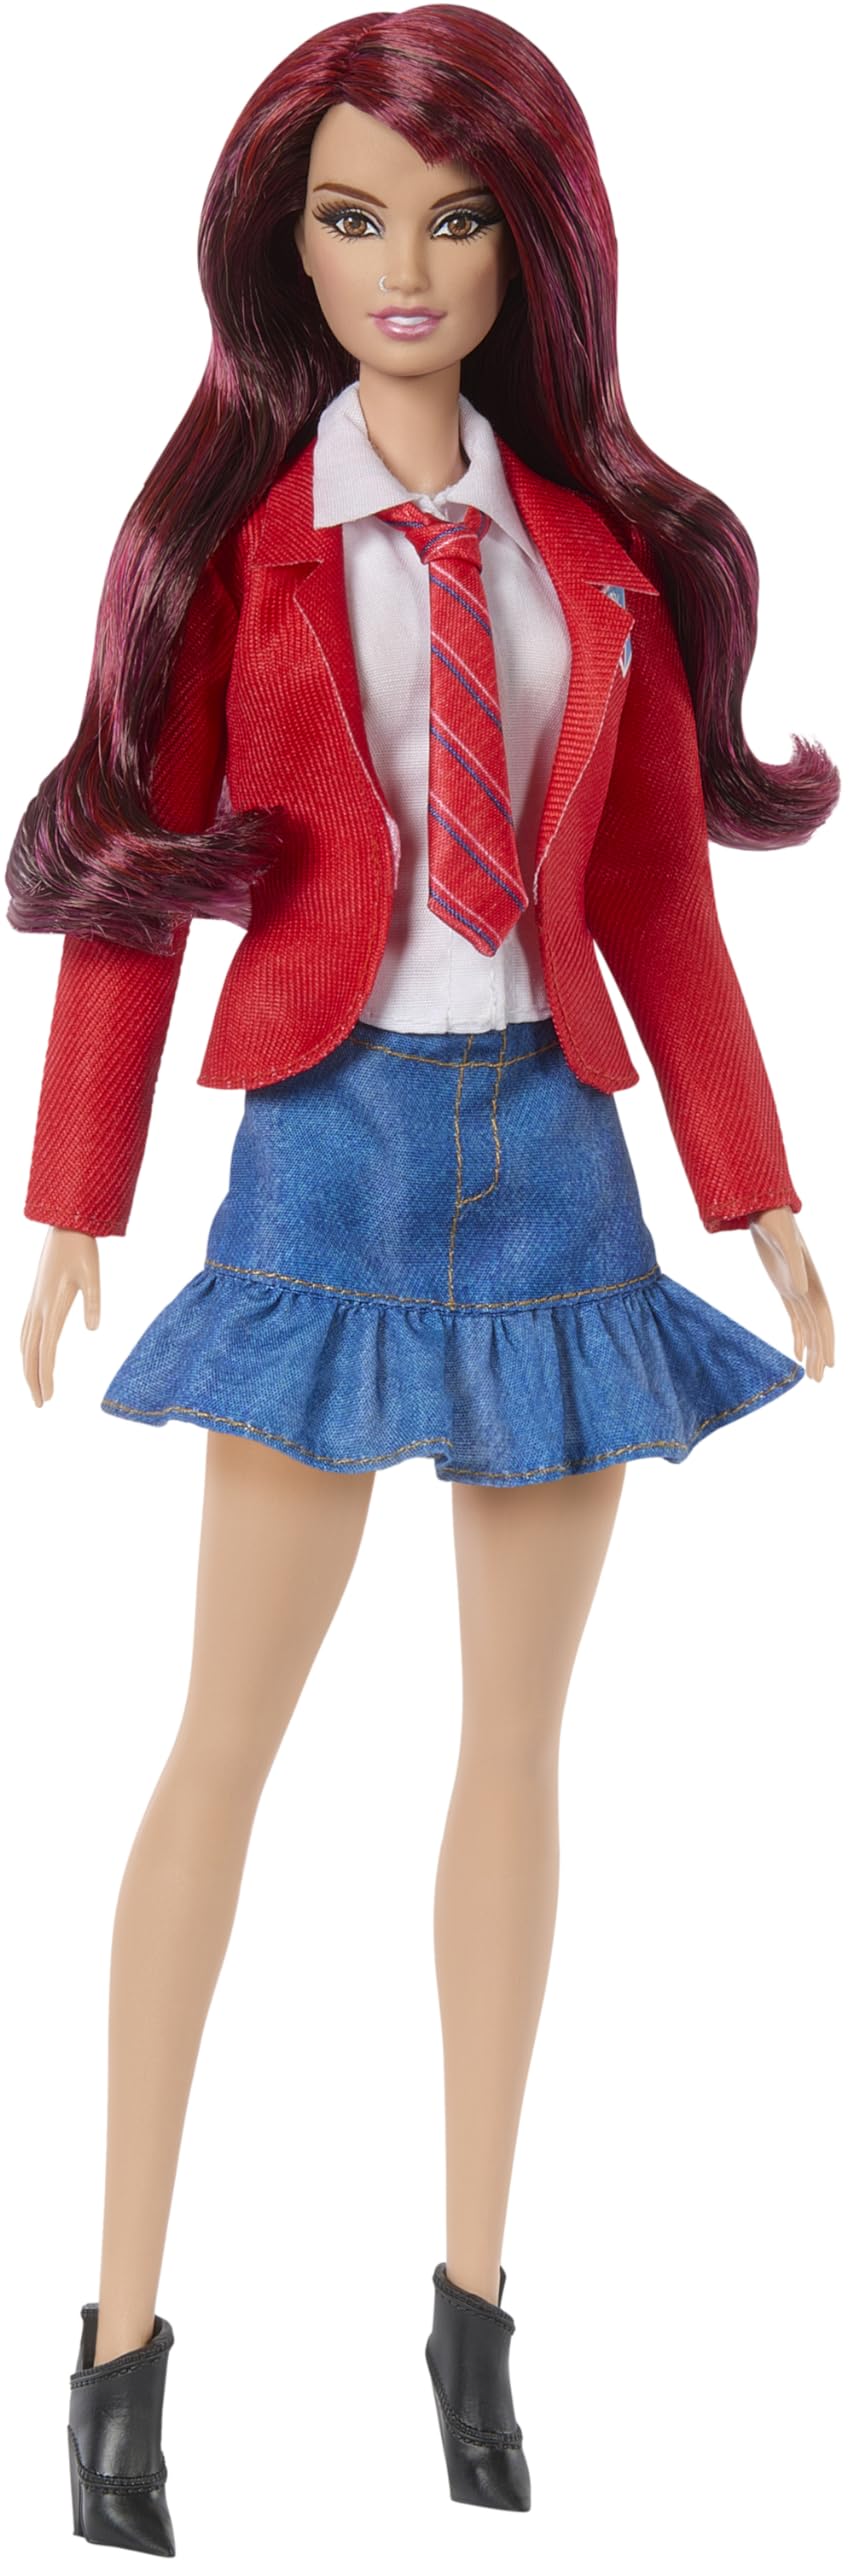 Barbie Roberta Doll Wearing Removable School Uniform with Boots, Necktie & Long Red Hair, Inspired by Rebelde & RBD